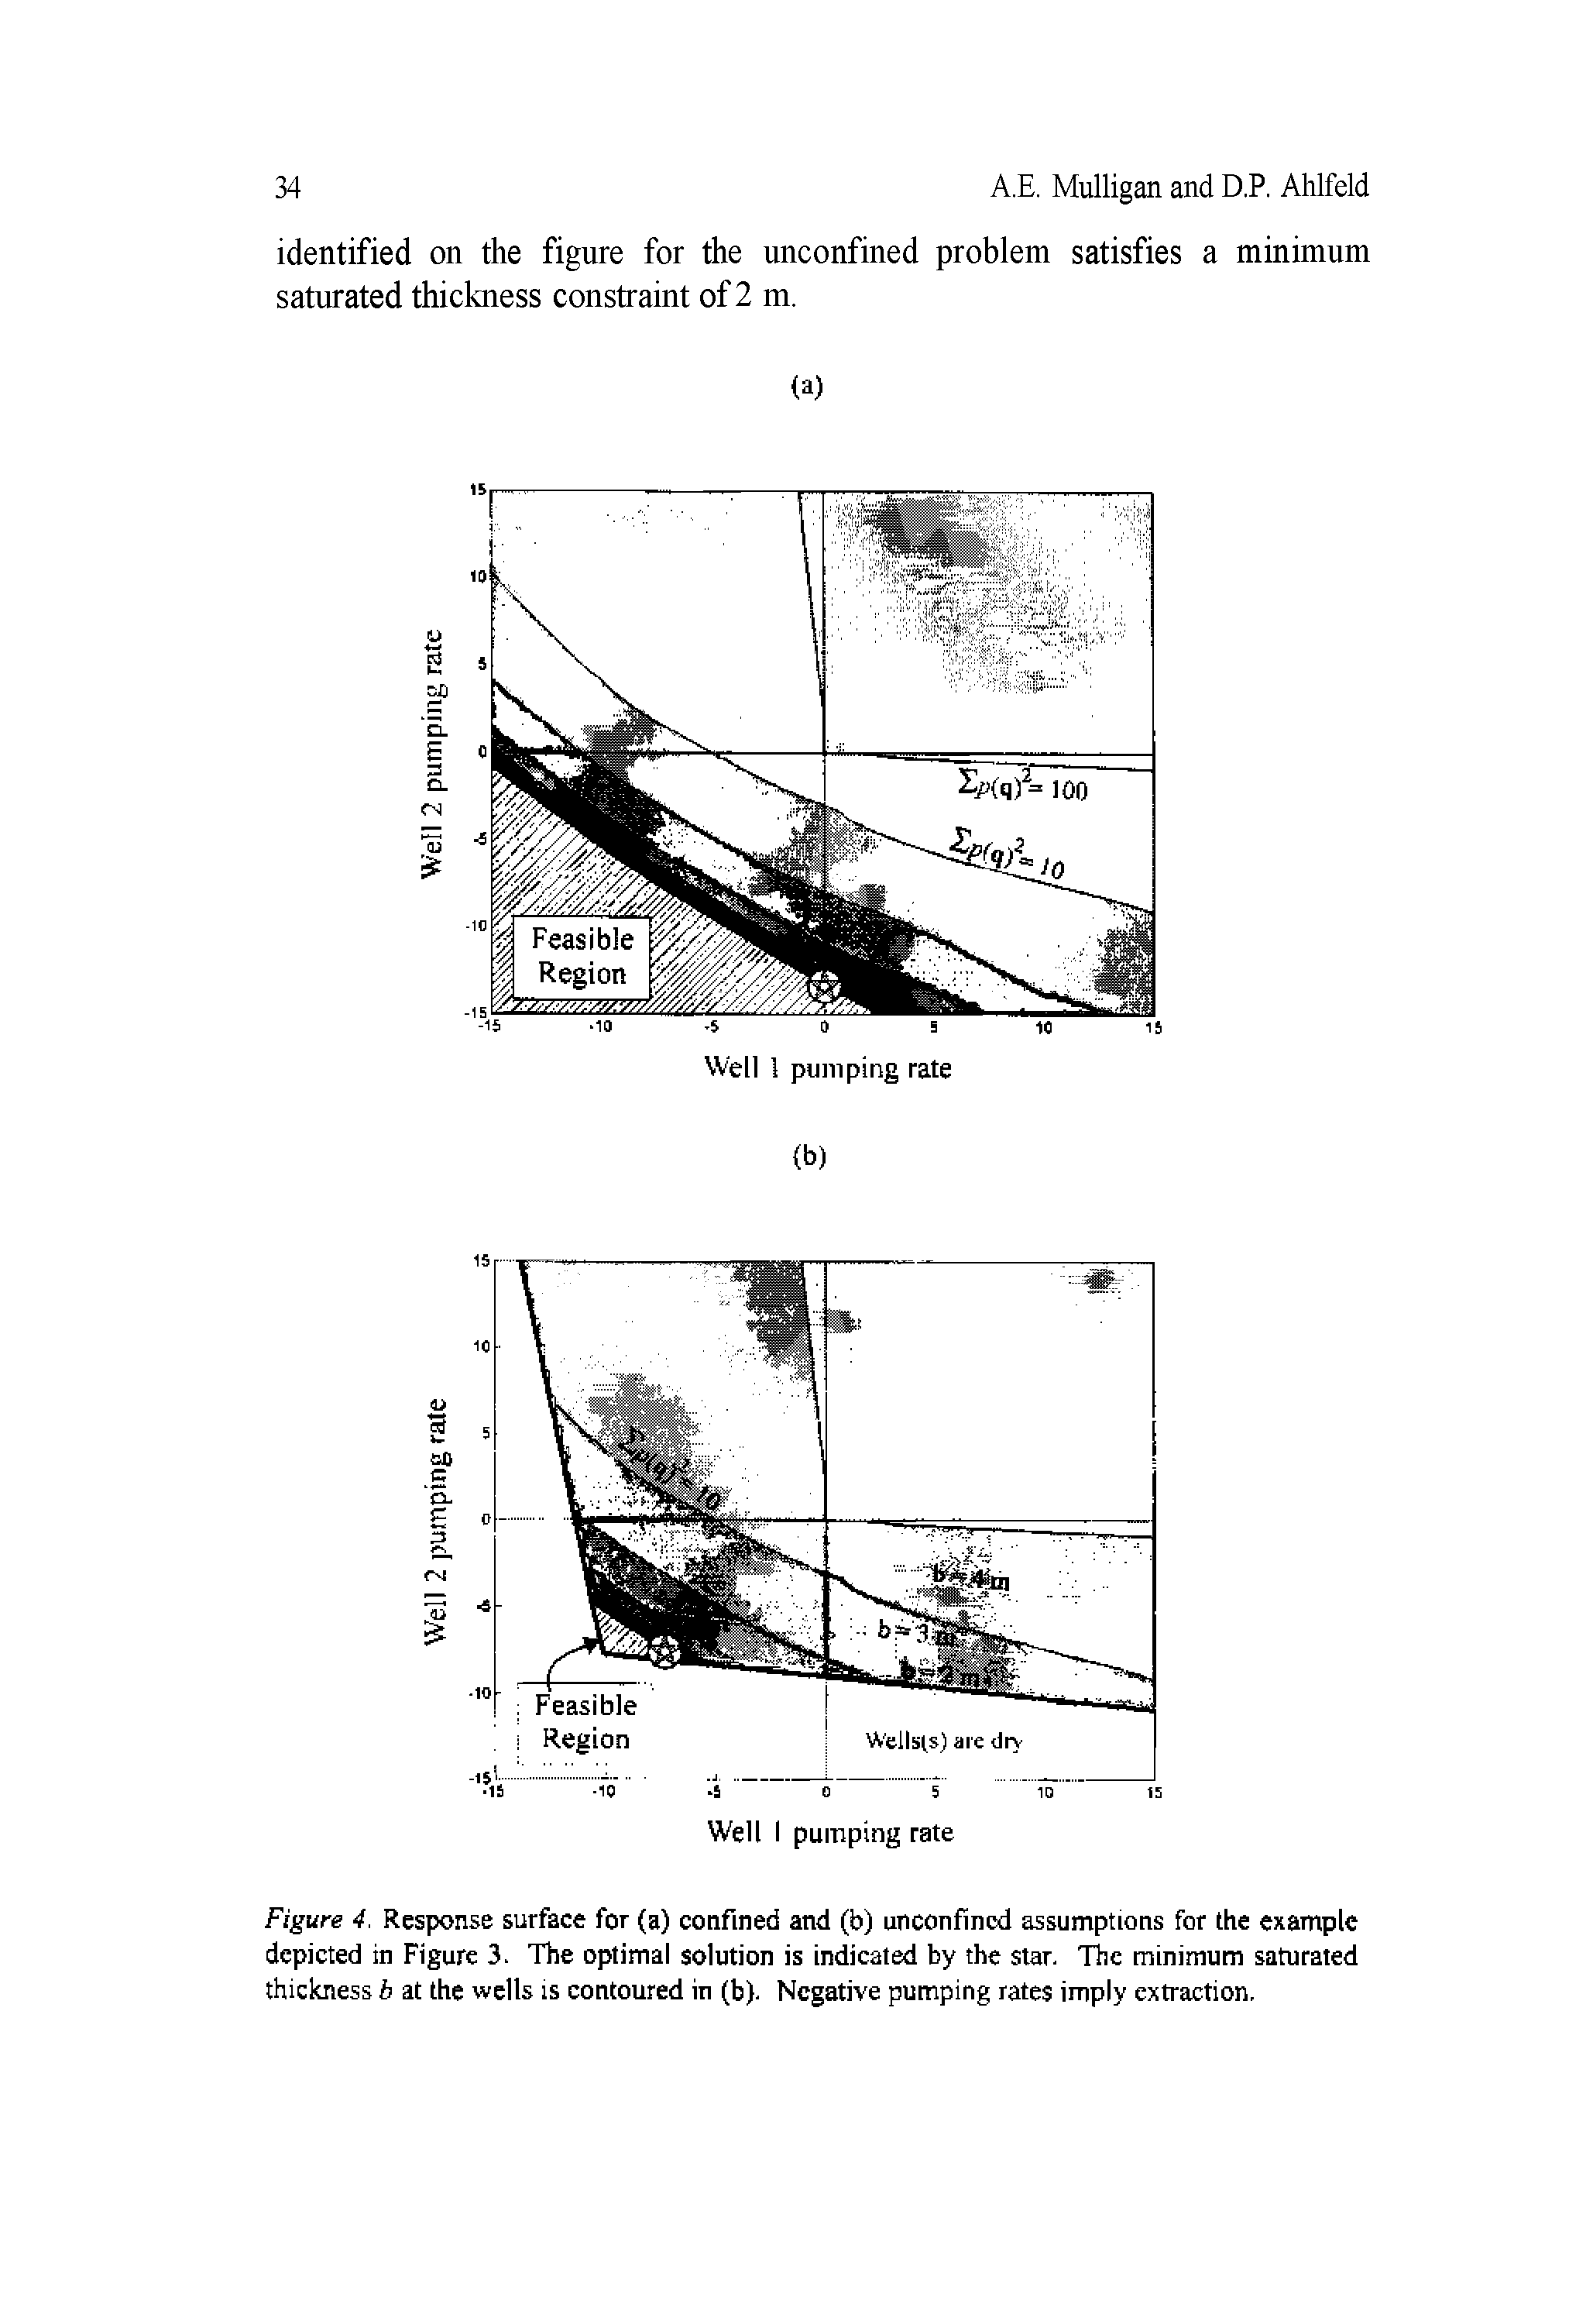 Figure 4. Response surface for (a) confined and (b) un con fined assumptions for the example depicted in Figure 3. The optimal solution is indicated by the star. The minimum saturated thickness b at the wells is contoured in (b). Negative pumping rates imply extraction.